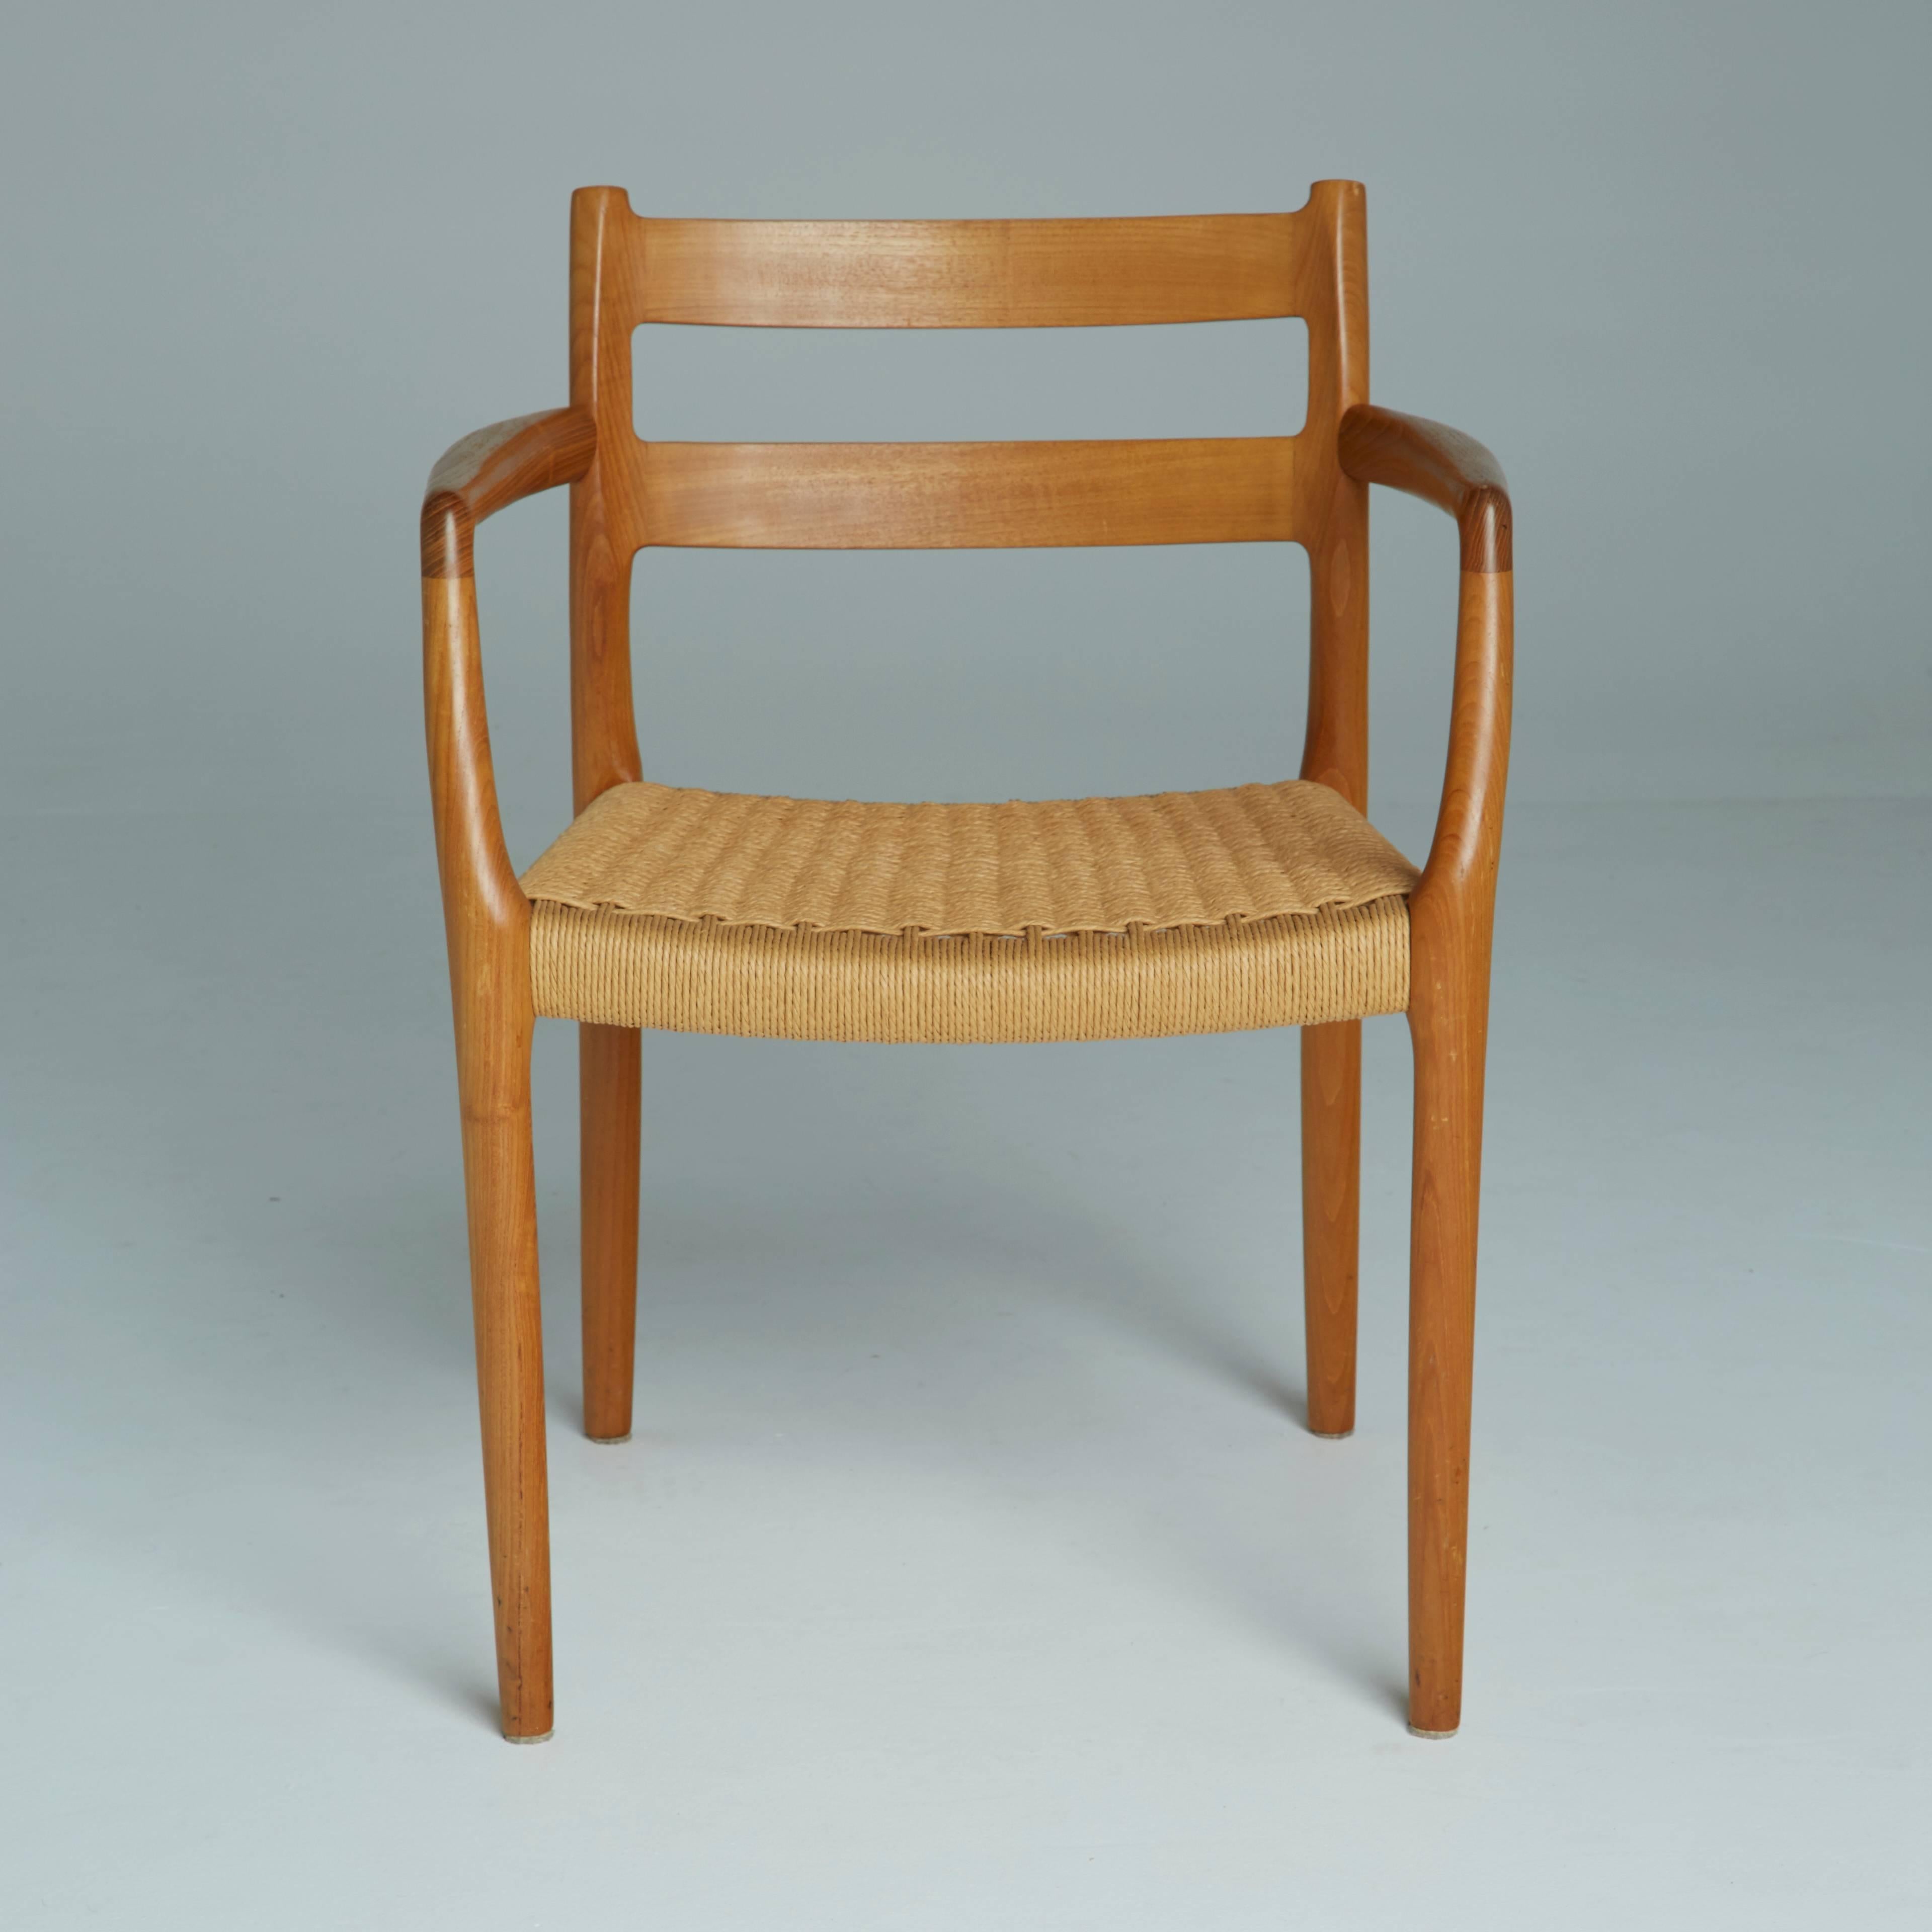 These Danish modern model 67 chairs, designed by Niels O. Møller, are one of J.L. Møller's landmark designs. The teak frames feature two curved support strips across the backrest, two sculptural arm rests, and an original woven cord seat. 

In